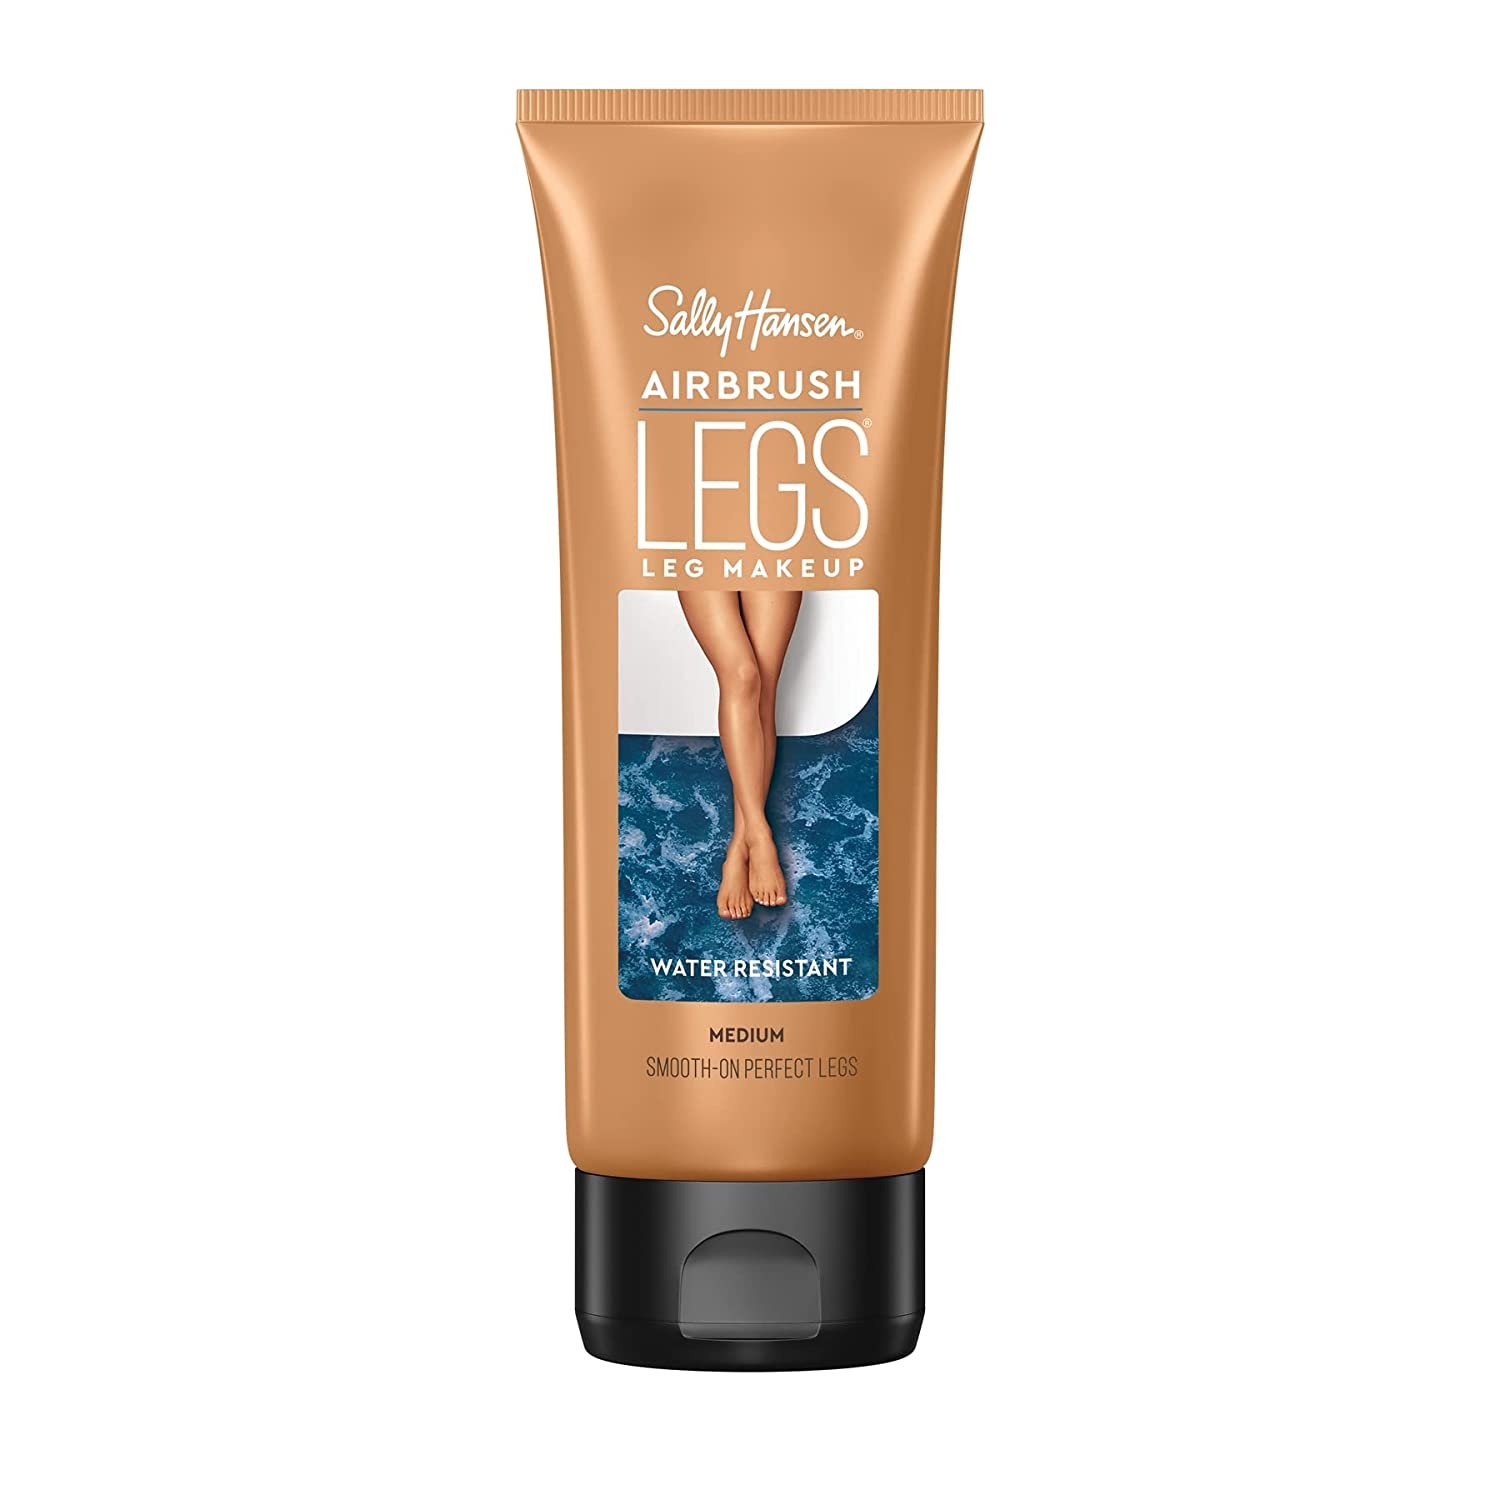 Sally Hansen Airbrush Legs Lotion, Medium, 4.4 oz, Water and Transfer-Resistant - image 1 of 4